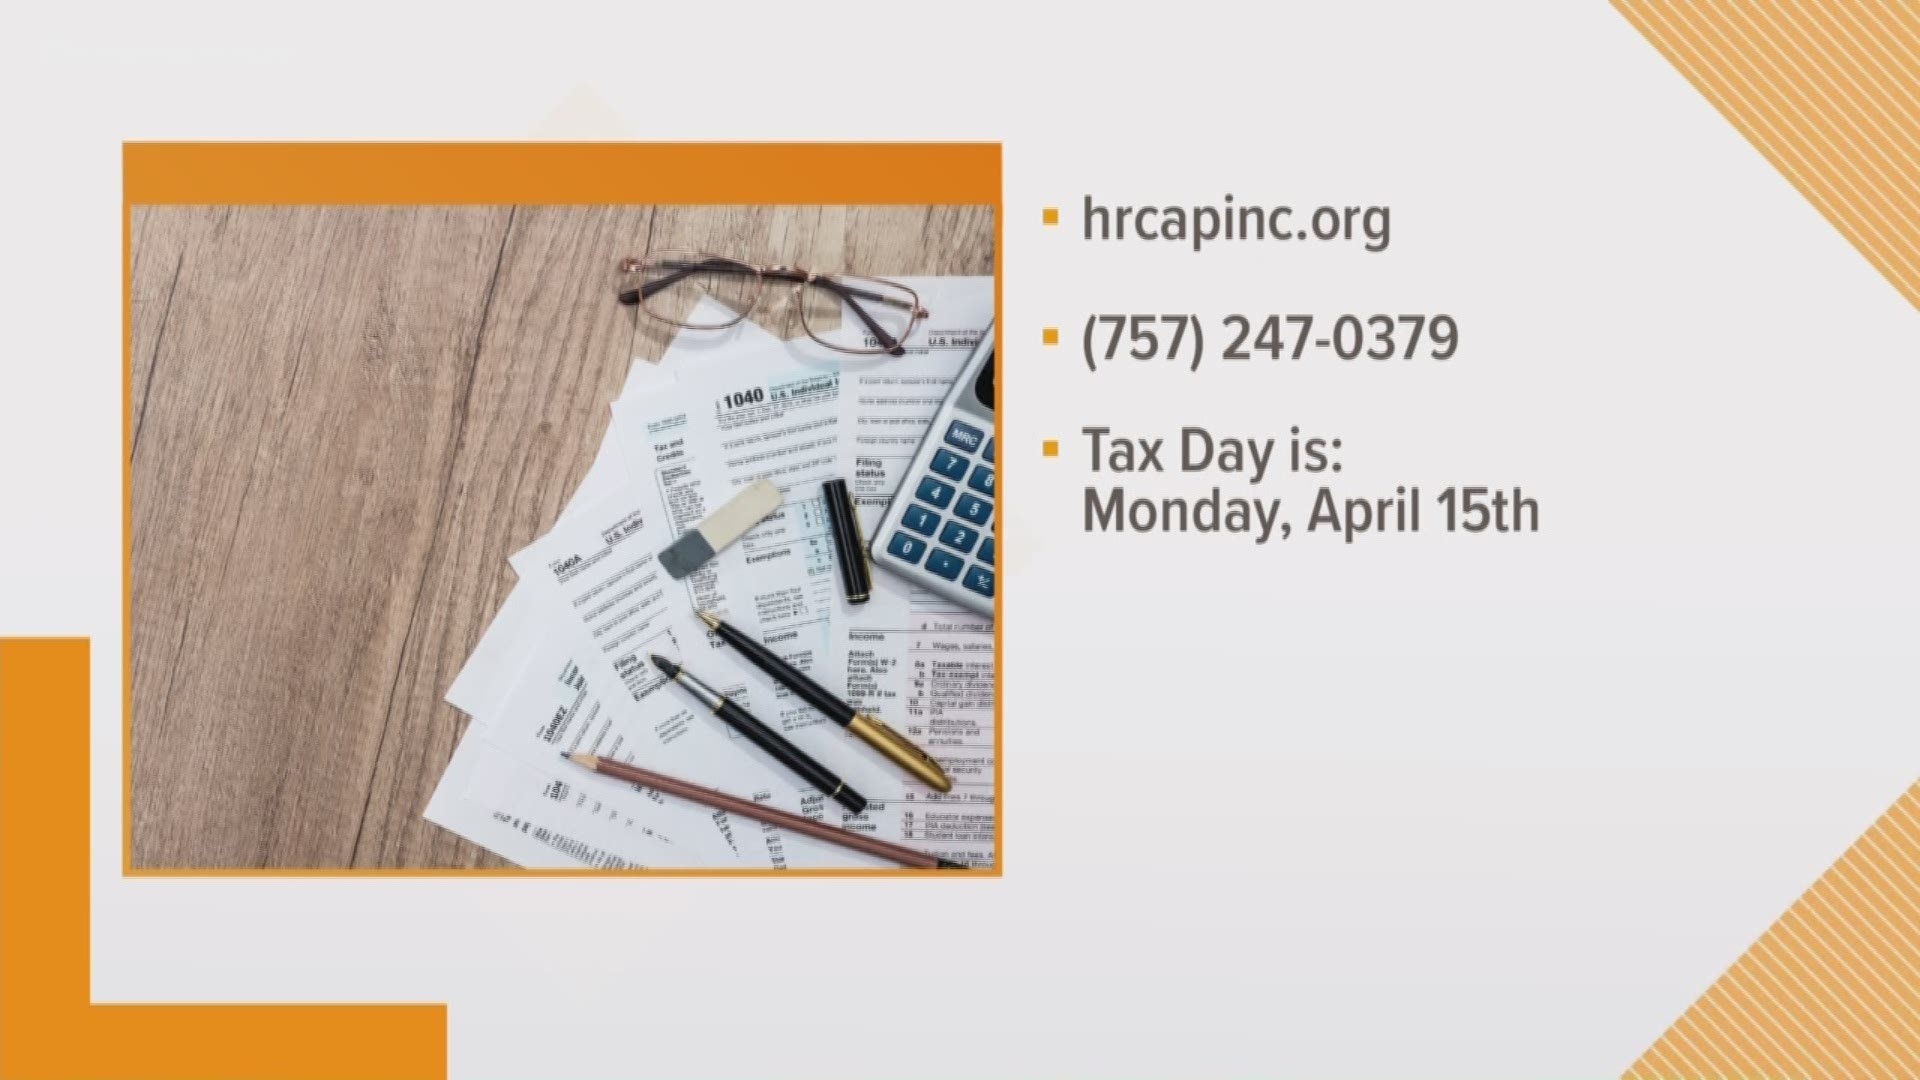 Hampton Roads Community Action Program (HRCAP) is offering free tax services to low-income families, seniors, and disabled residents.